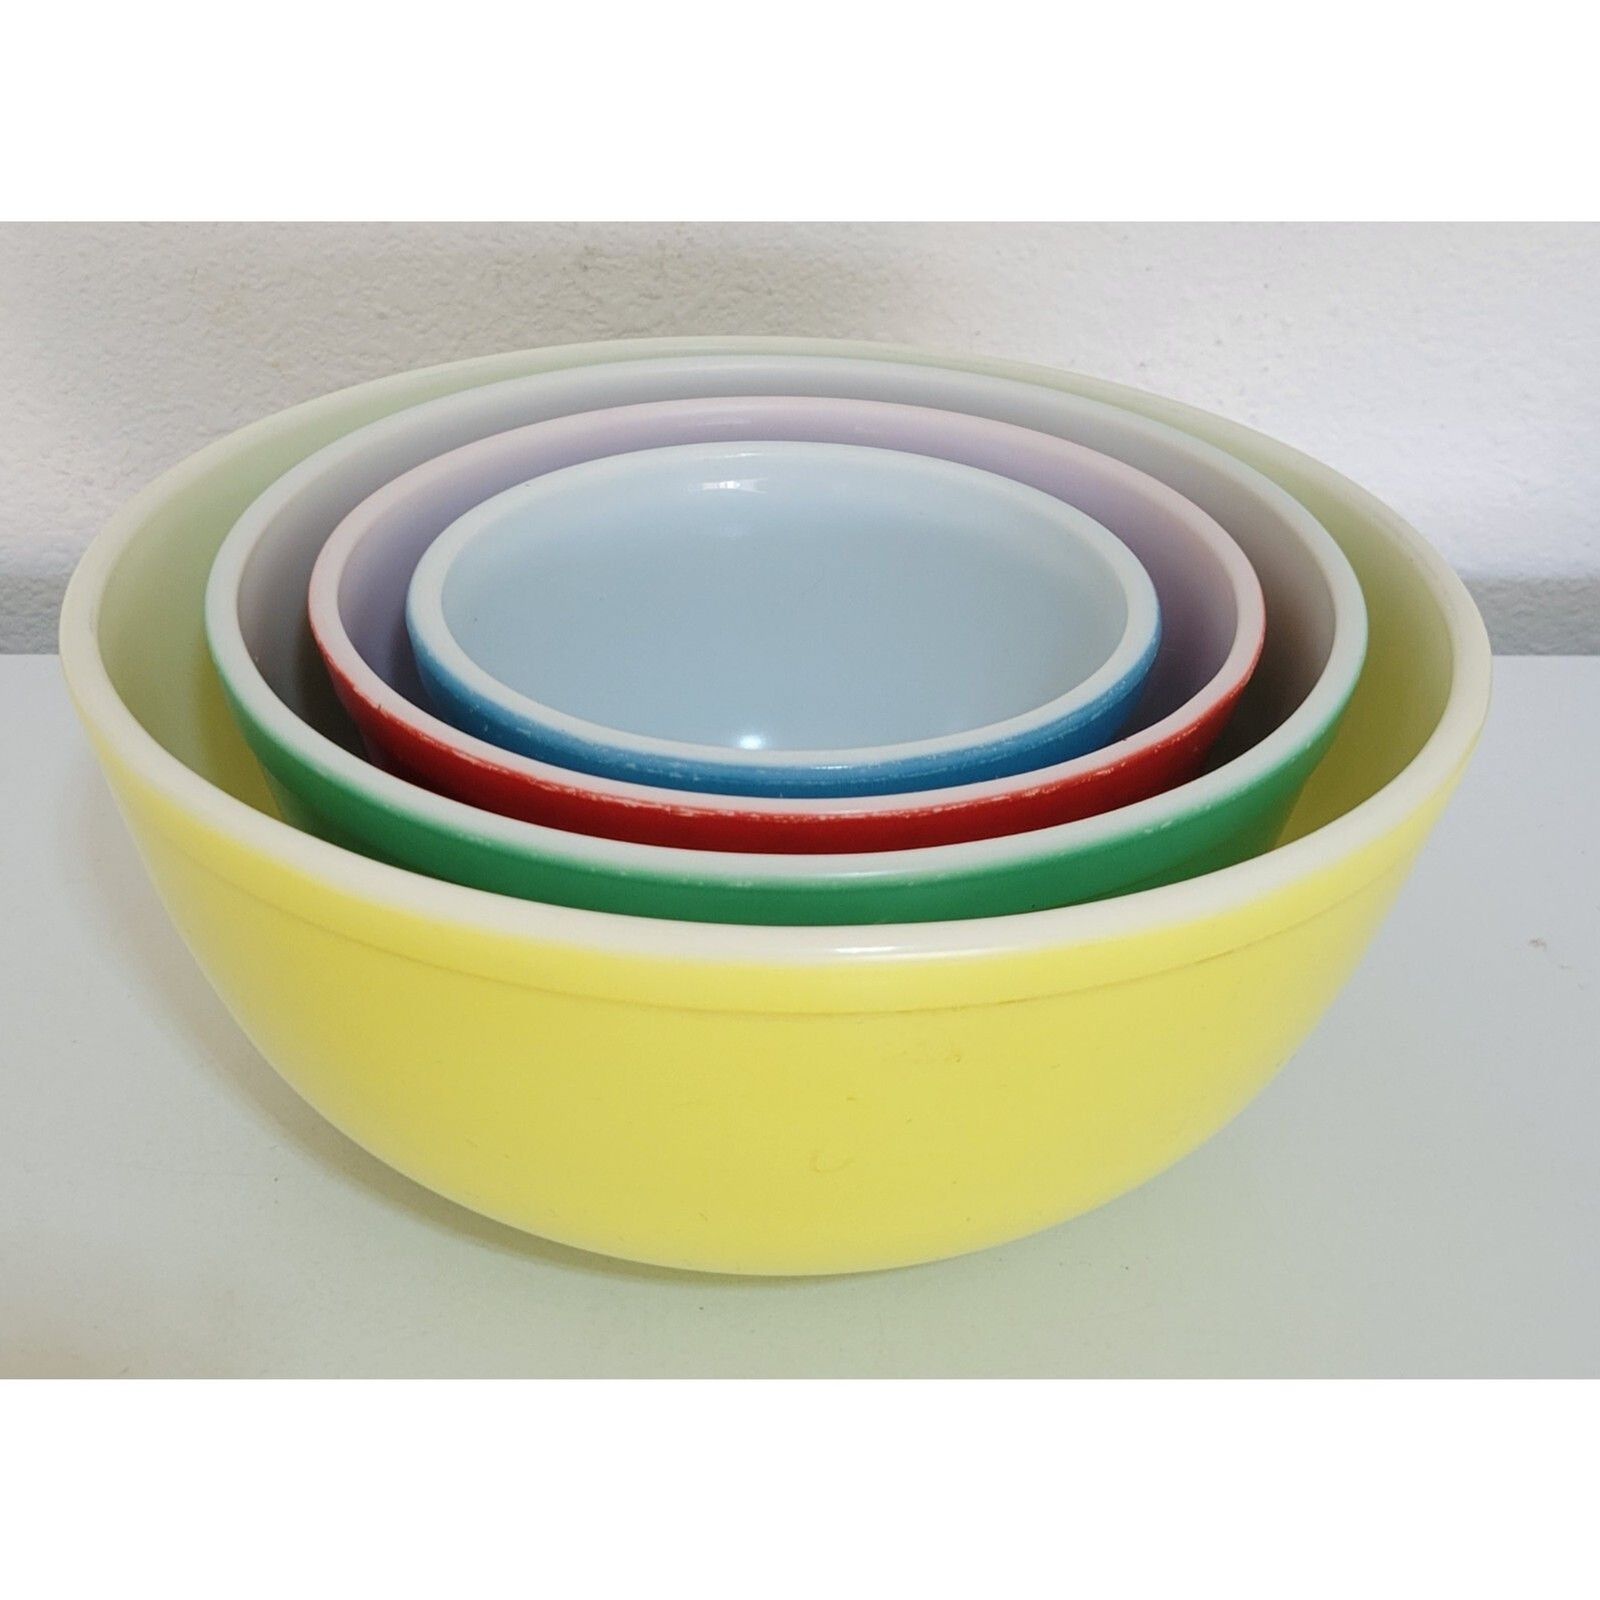 4 Vintage Pyrex Primary Colors Nesting Mixing Bowl Set 401, 402, 403, 404